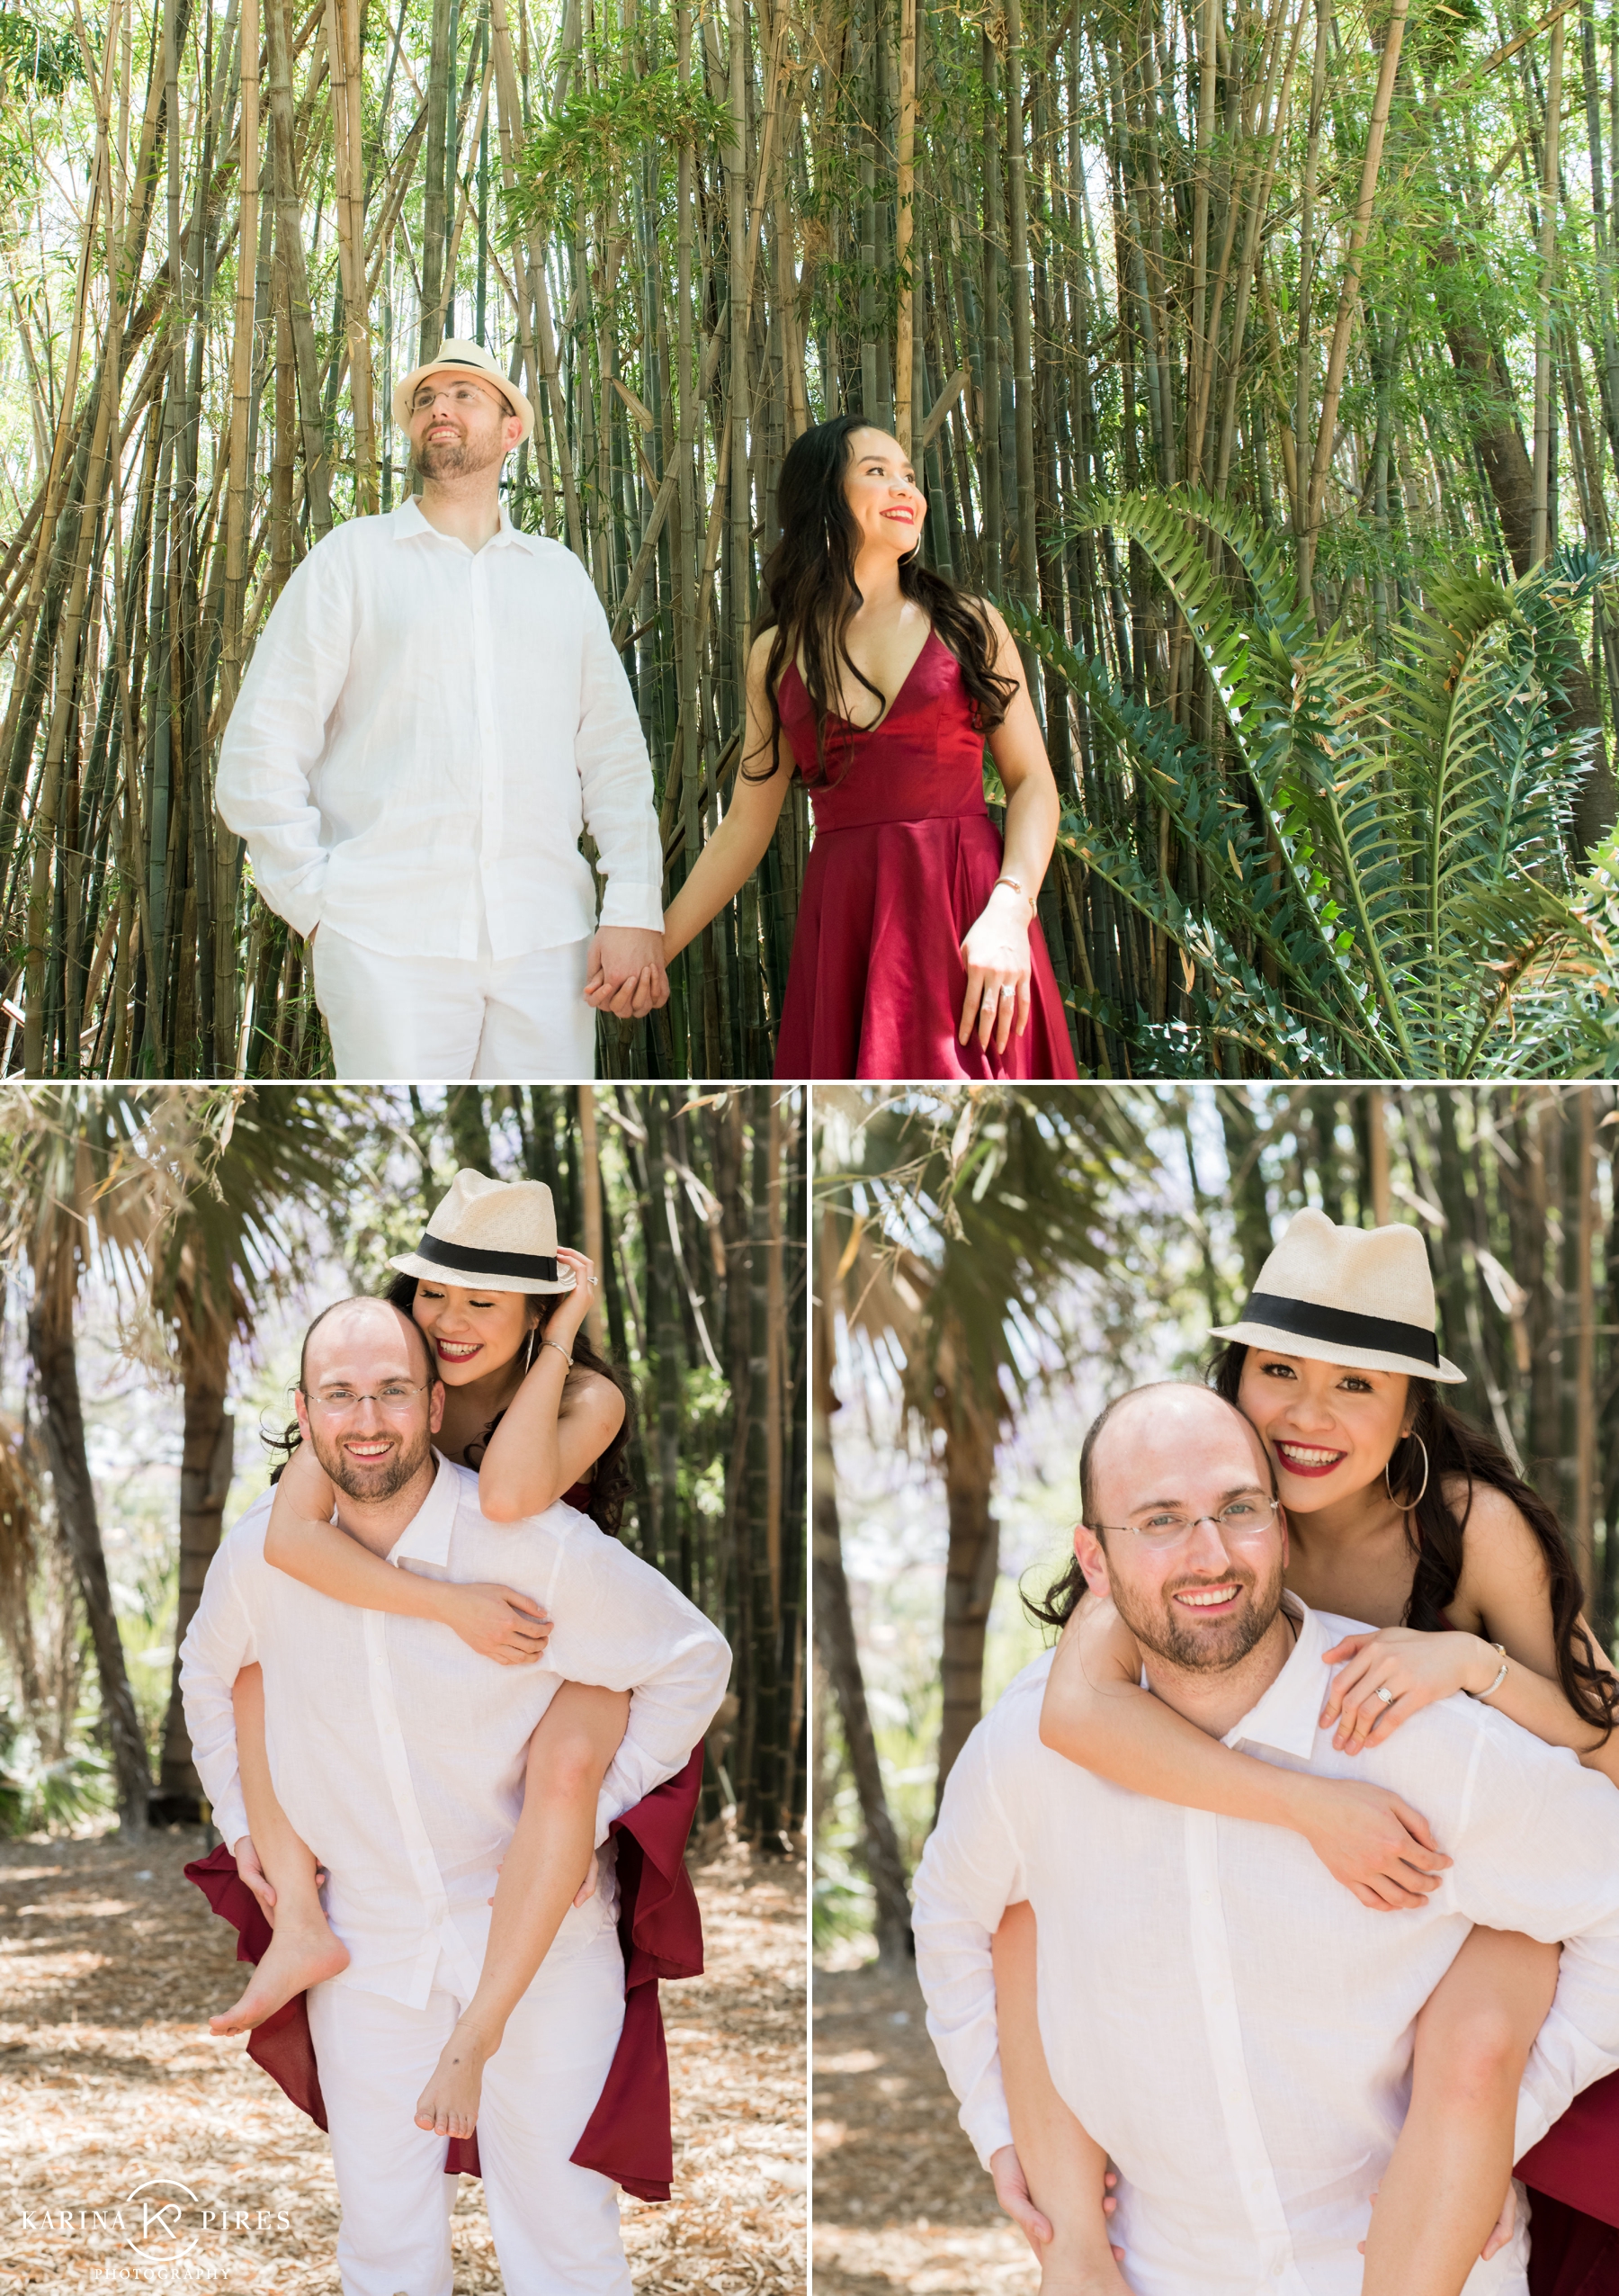 Los Angeles garden engagement session | Karina Piers Photography